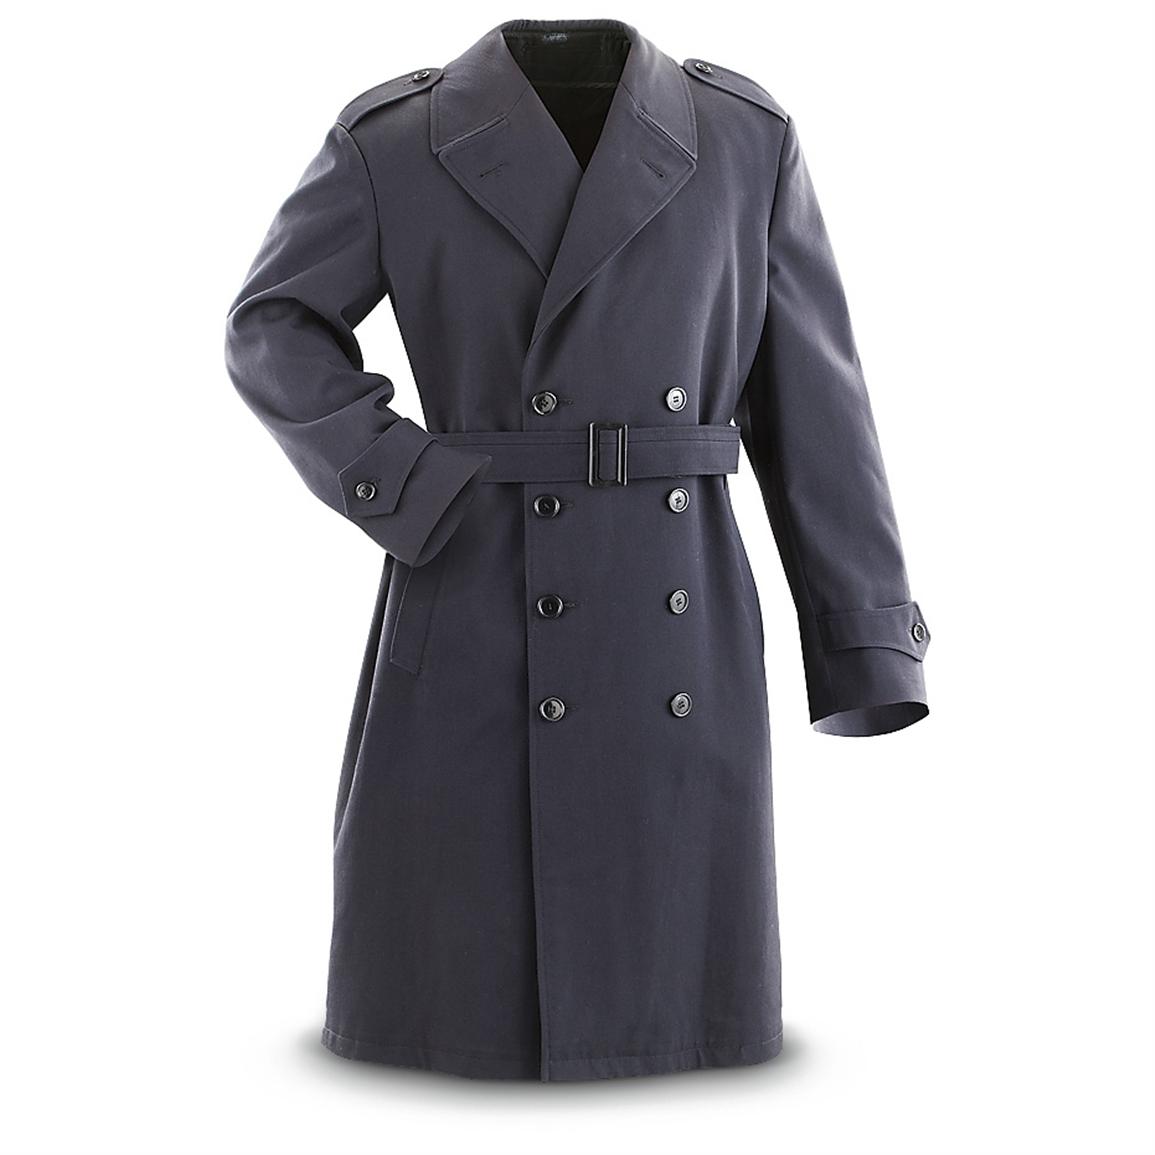 New Dutch Military Surplus Trench Coat - 216902 Military Trench